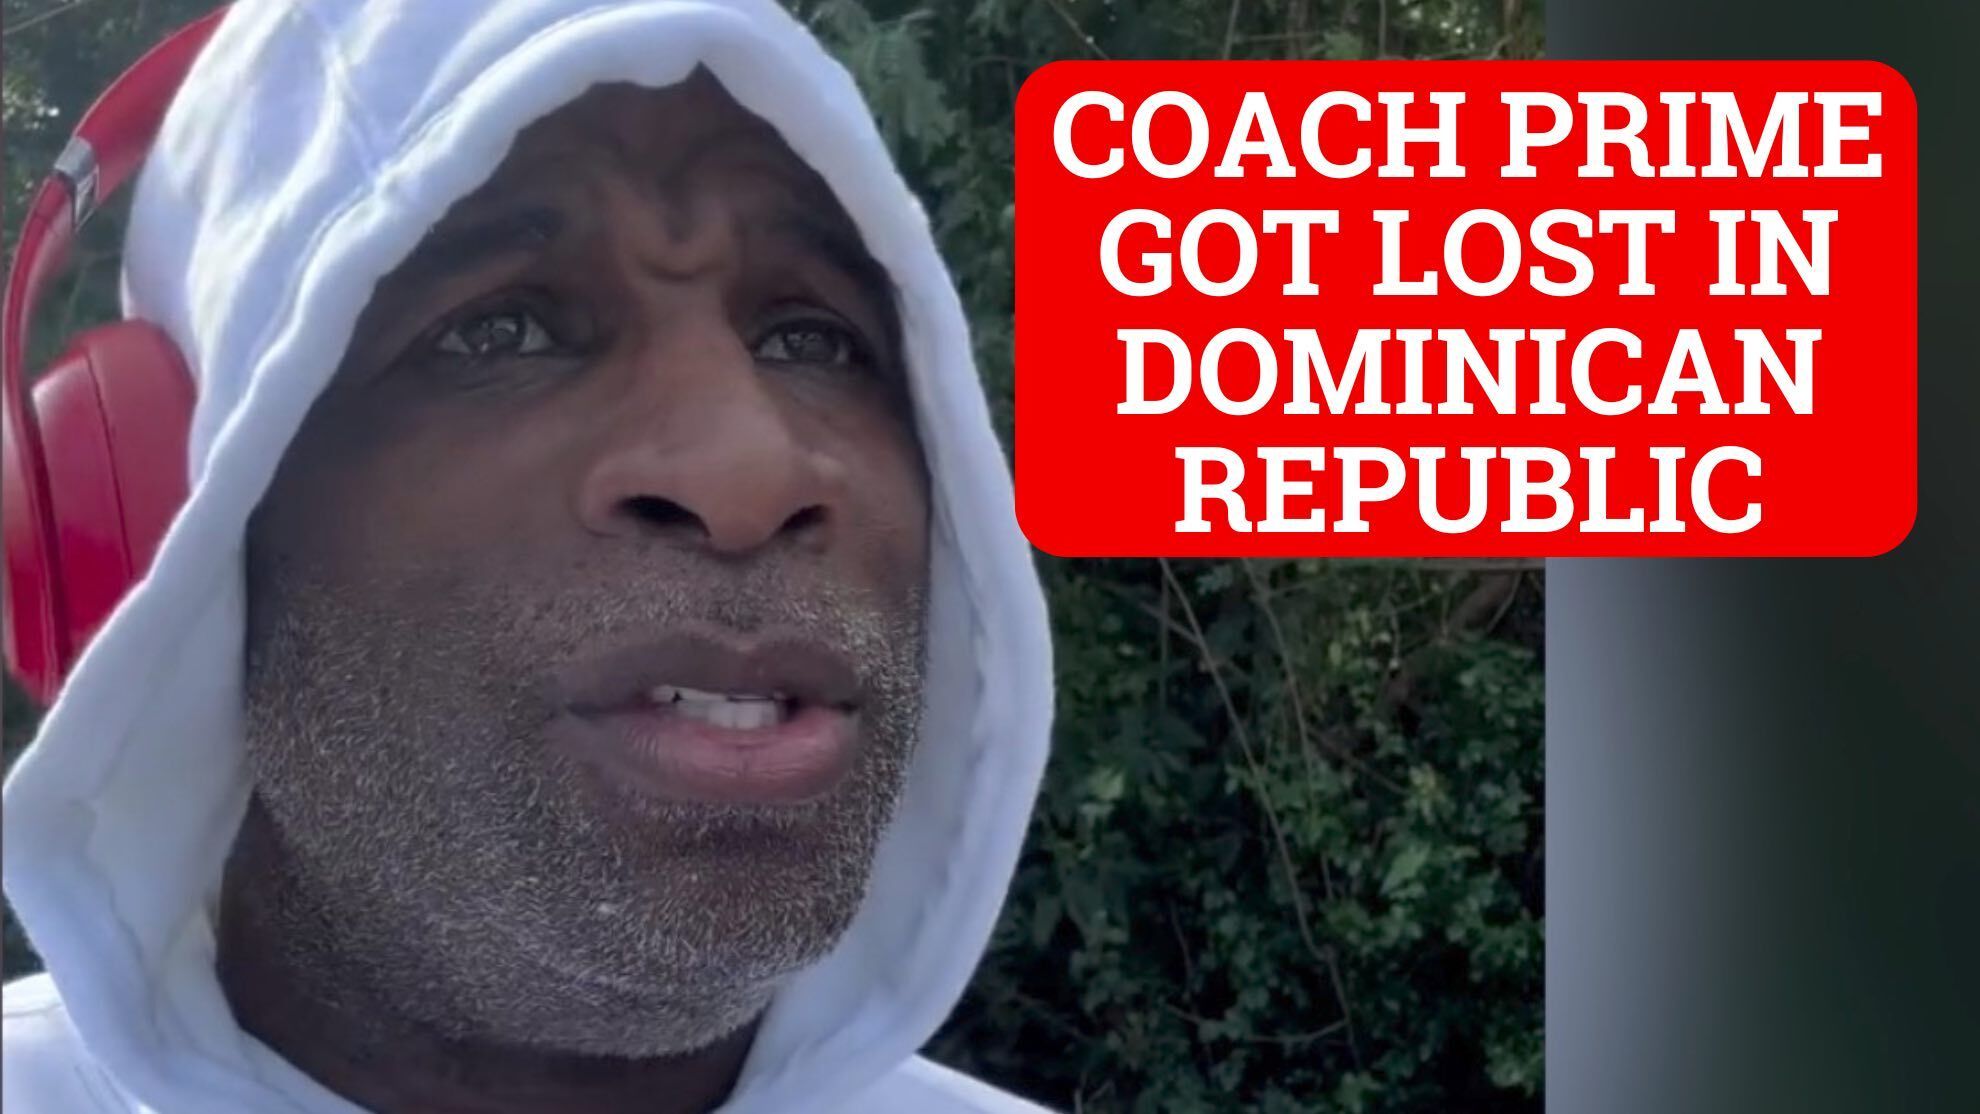 Deion Sanders paranoid cry for help after getting lost in Dominican Republic